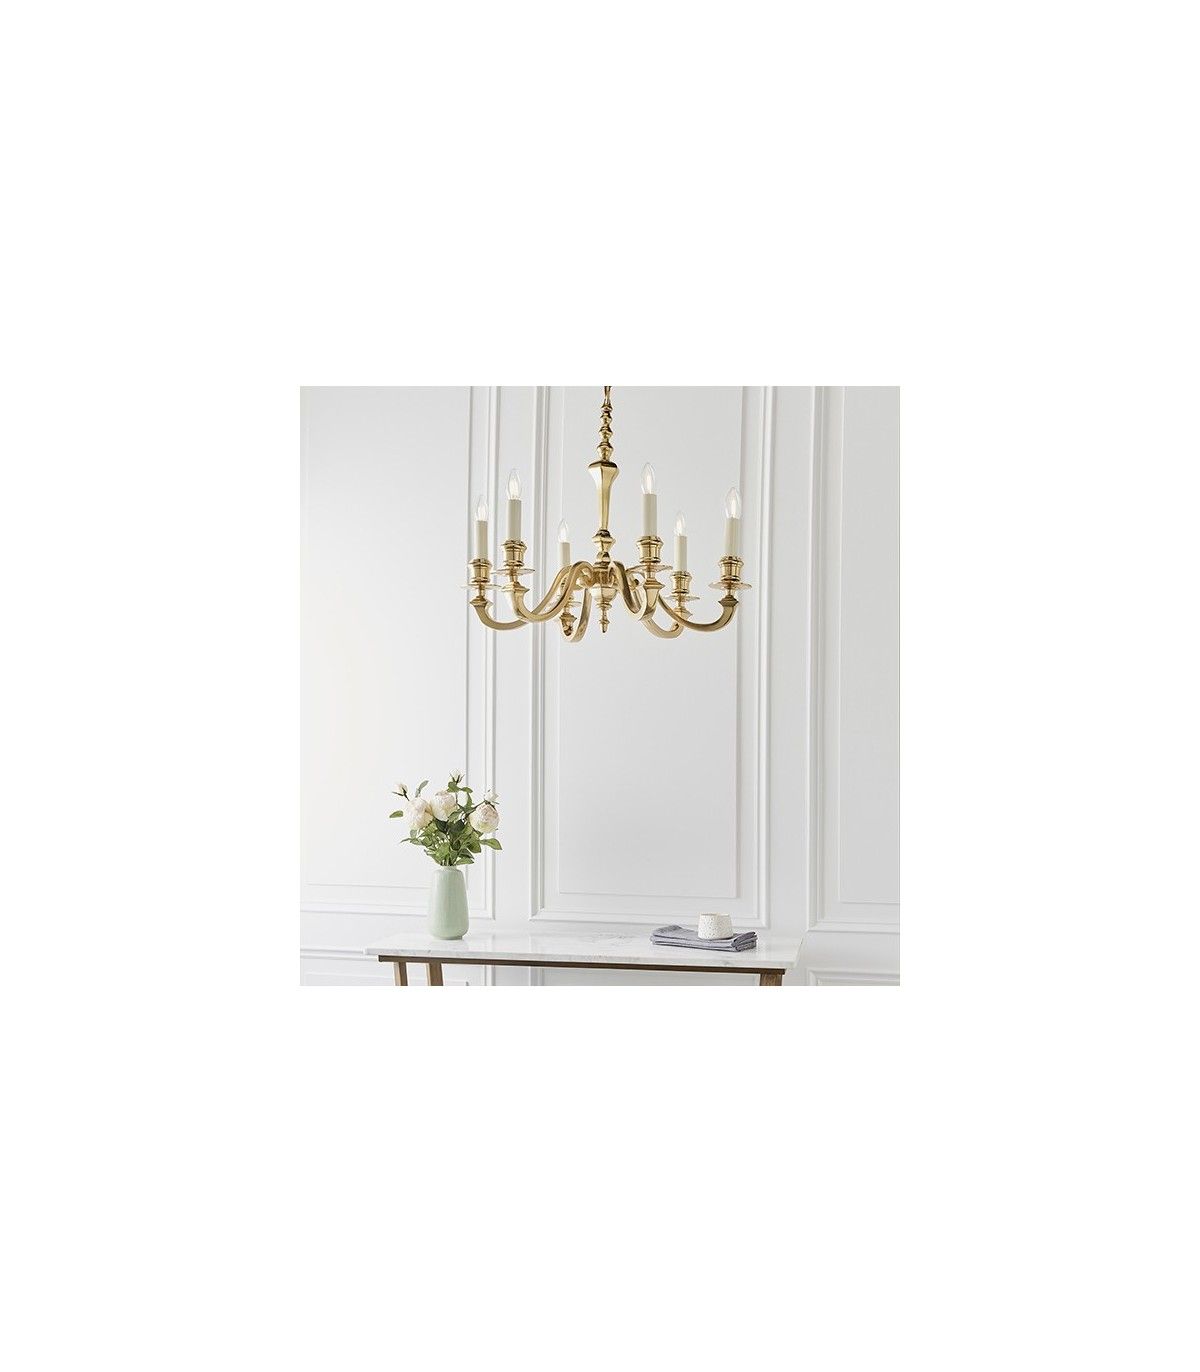 Widely Used Gloss Cream Chandeliers Regarding Interiors Fenbridge 6 Light Multi Arm Lamp Chandelier Solid Brass, Gloss  Cream Paint (View 9 of 15)